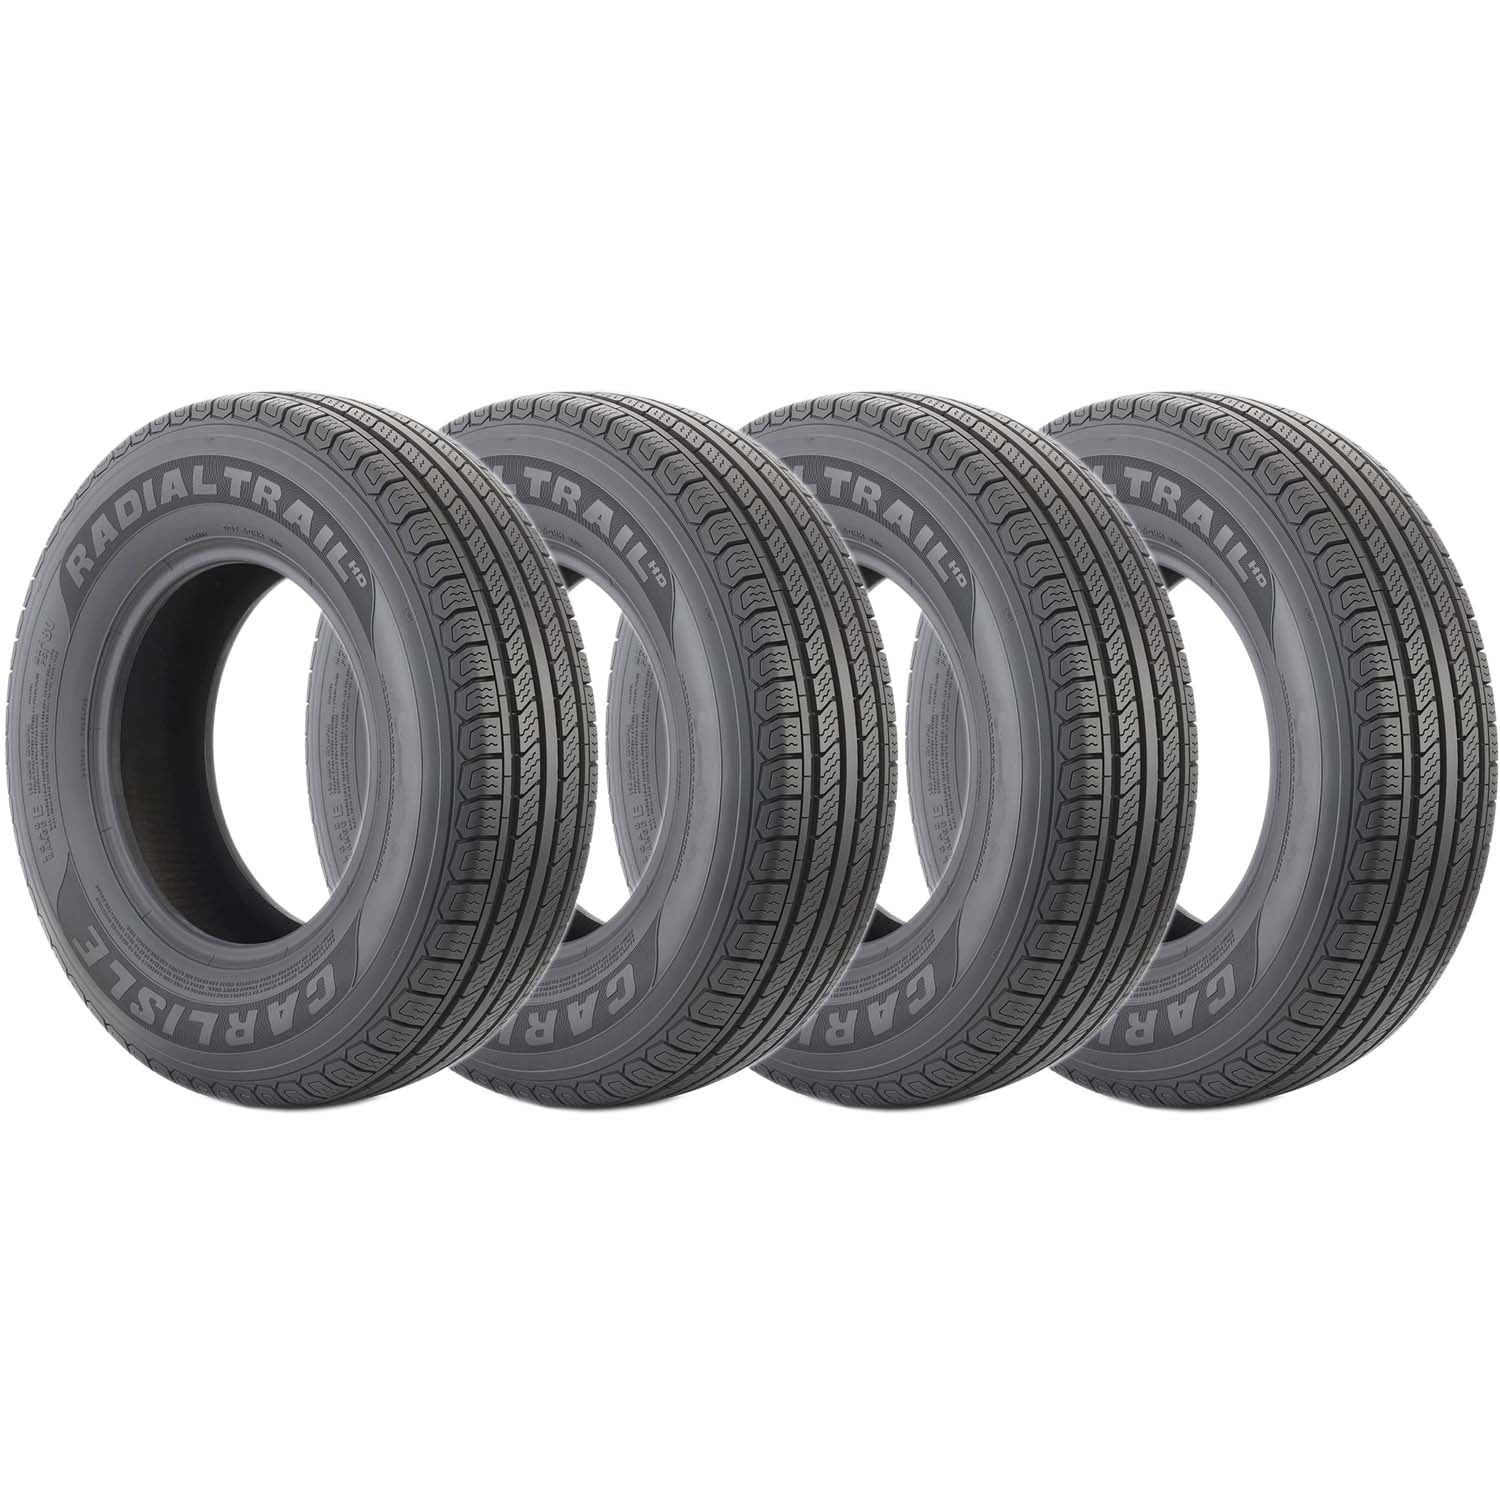 Carlisle Radial Trail HD Trailer Tire LRD 8ply ST175/80R13 Pack of 4